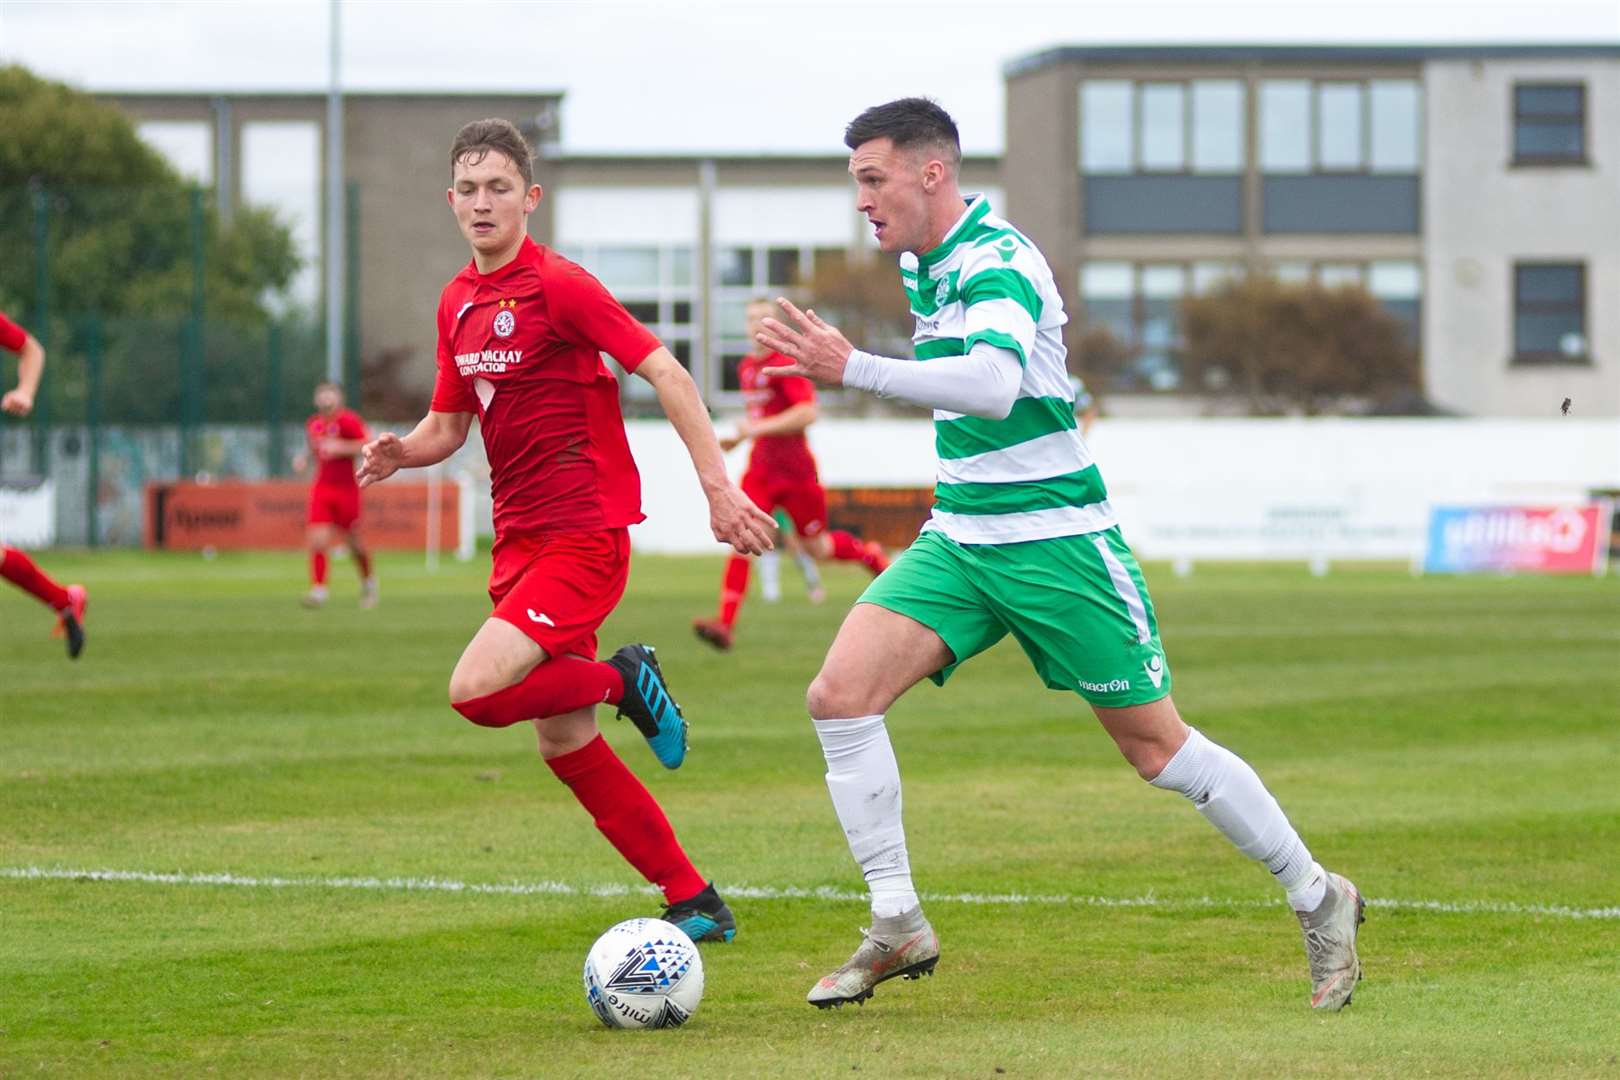 Buckie Thistle forward Steven Ross is tracked by Brora Rangers' Miller Gamble. ..Brora Rangers FC (2) vs Buckie Thistle FC (2) - Buckie win 4-3 on penalties - Highland League Cup Semi Final - Dudgeon Park, Brora 18/10/2020...Picture: Daniel Forsyth..